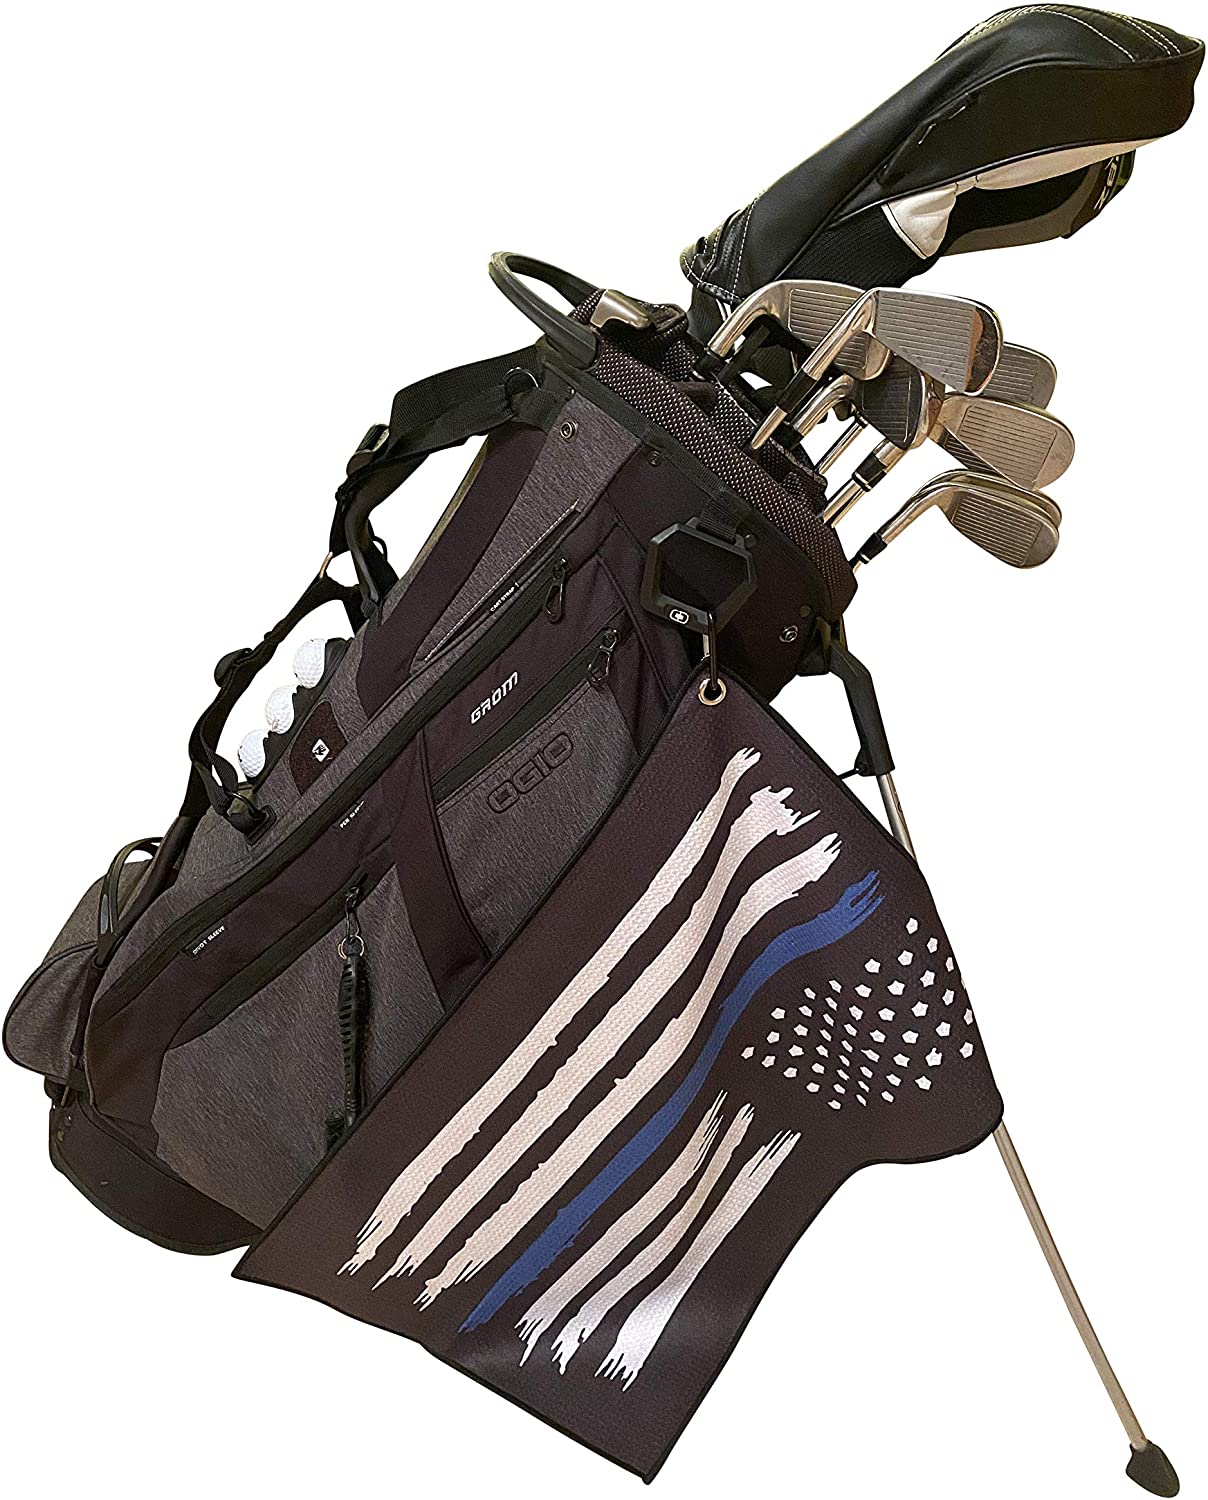 Police Golf Towel - American Flag with Thin Blue Line clipped on bag